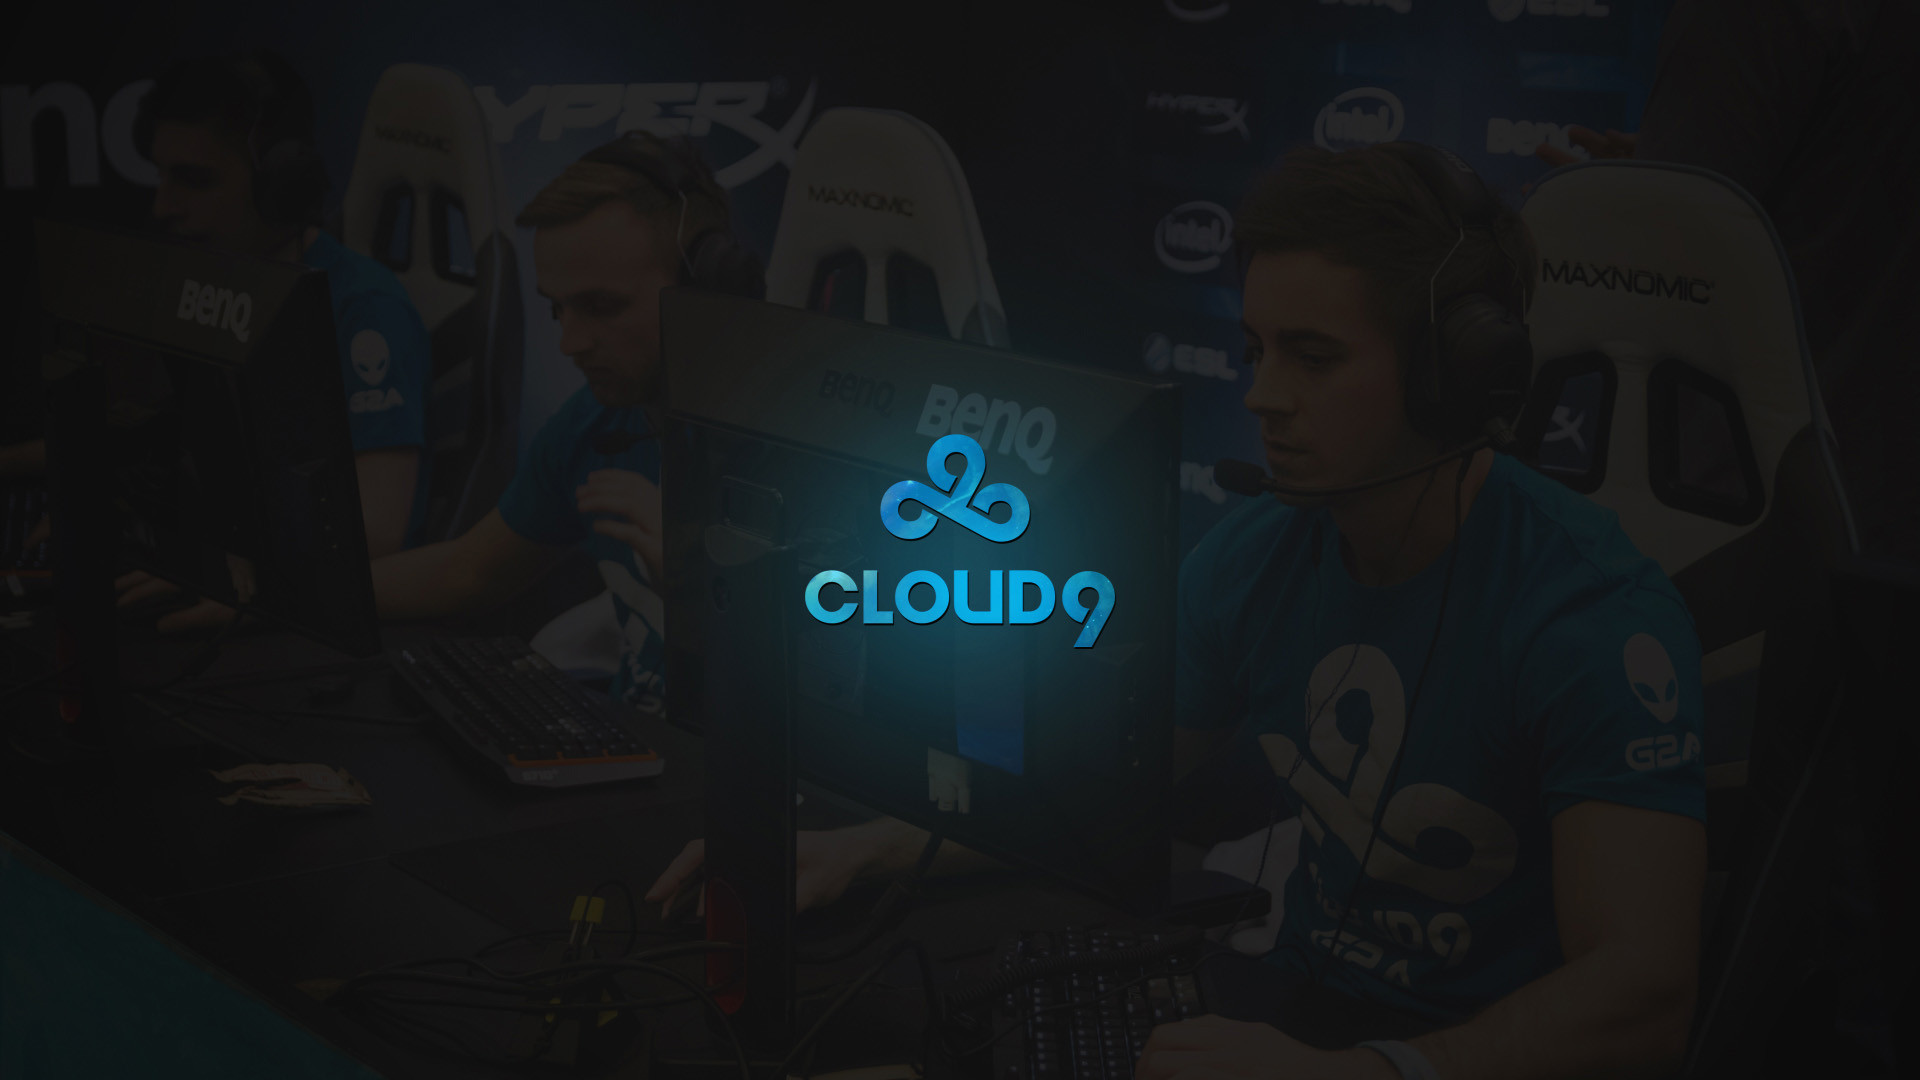 1920x1080 wallpapers include wallpapers of the Cloud9 CS:GO team and of the .